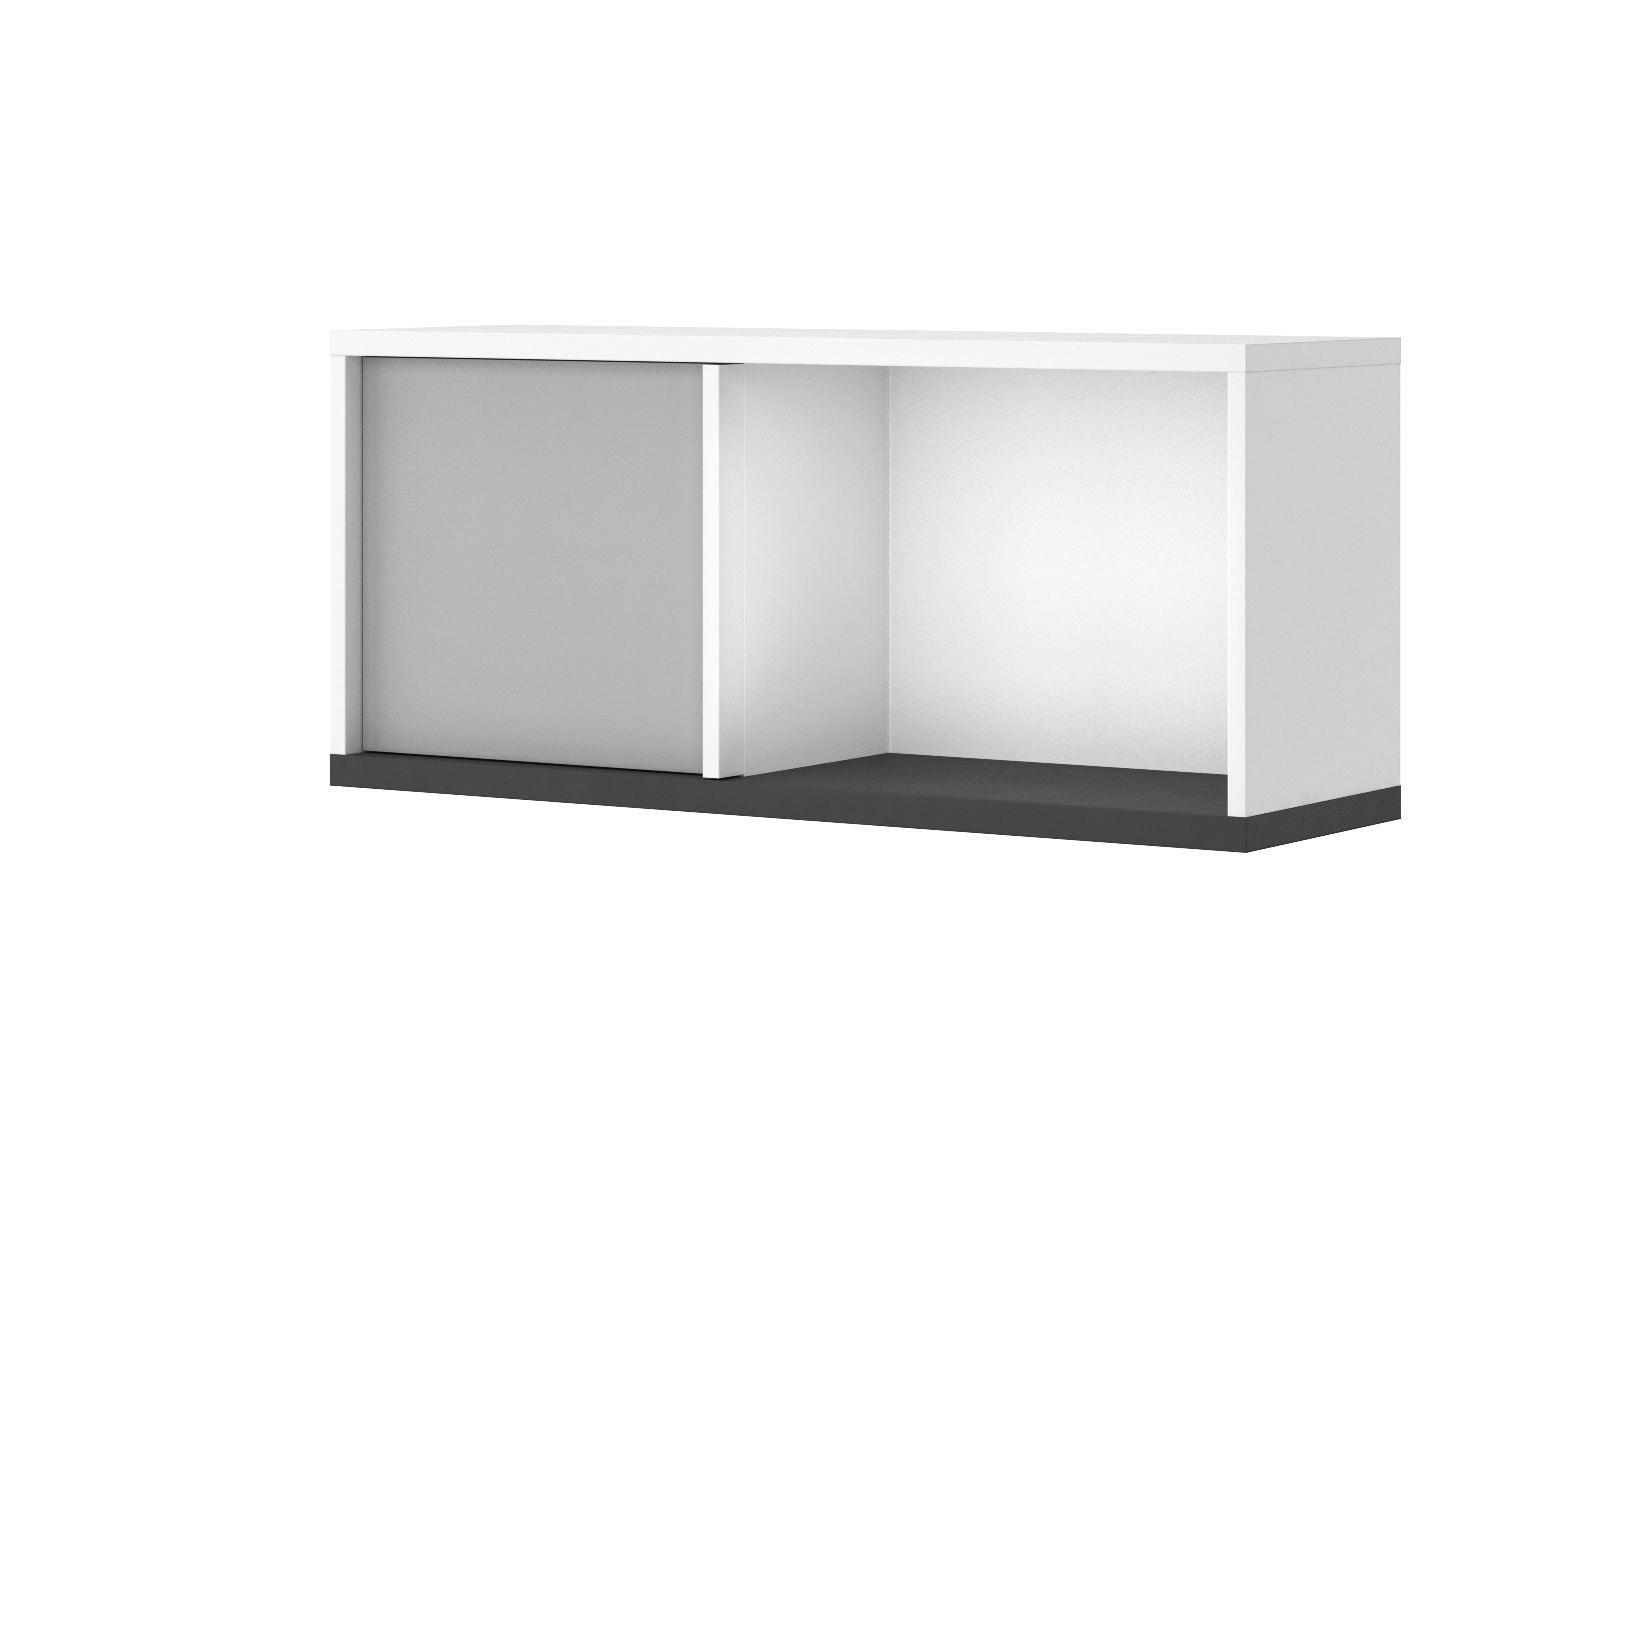 View Imola IM10 Wall Hung Cabinet information